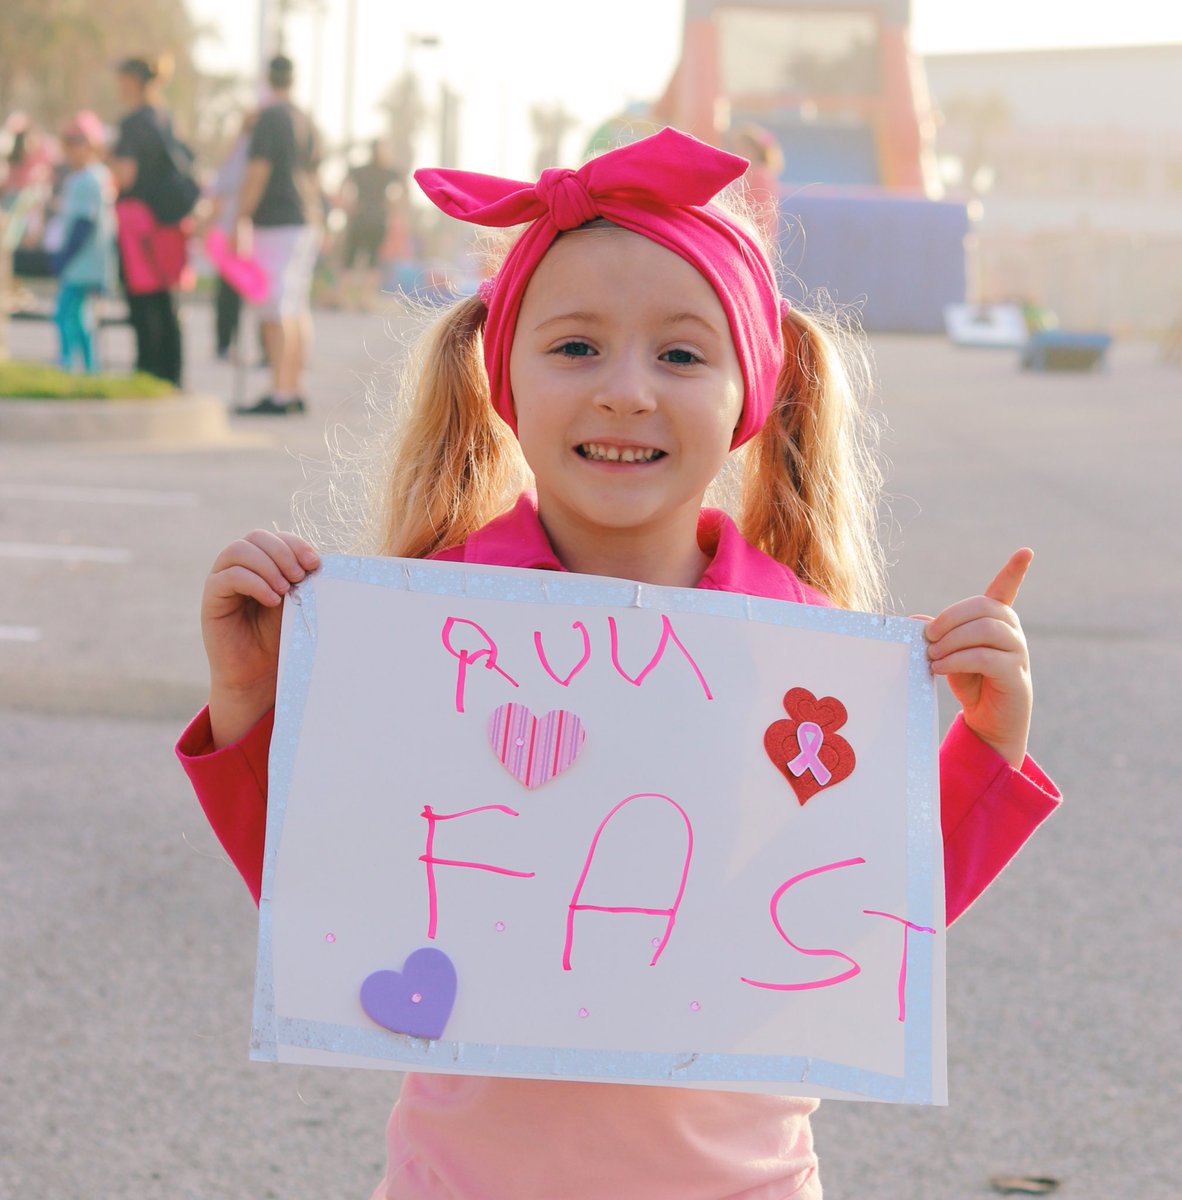 The race has officially begun! Come out and make a sign to cheer on our Donna runners!
#BeachKidsJax #BeachChurch #ForTheBeaches